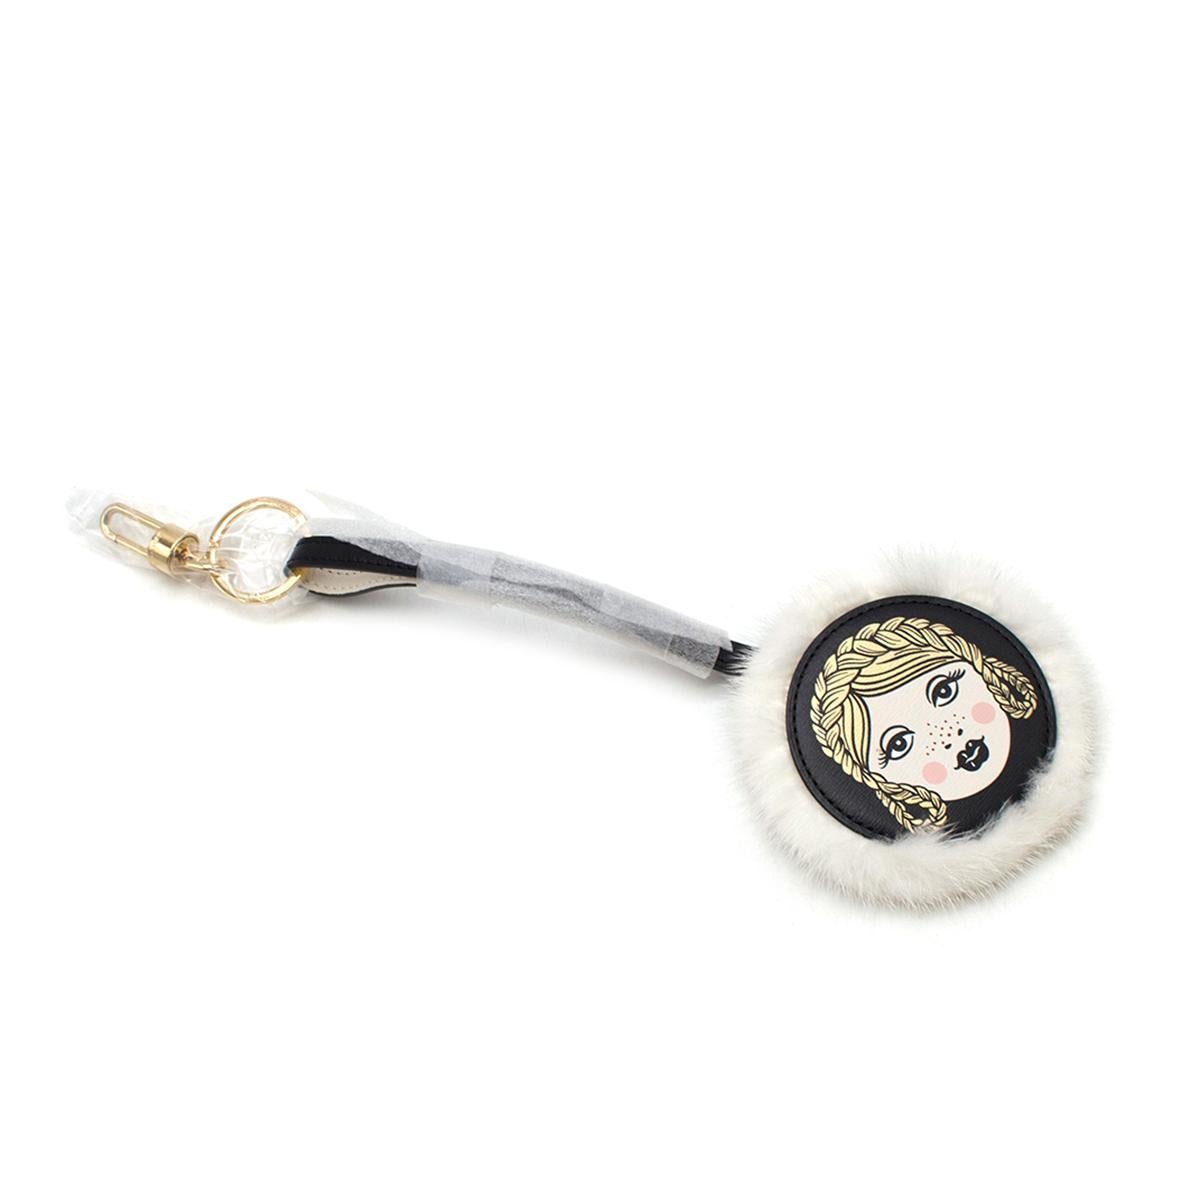 Delvaux Face Keychain with Mink Fur

-Black leather keychain
-Girl's face print 
-White mink fur trim
-Gold toned hardware
-Lobster clasp closure

Please note, these items are pre-owned and may show signs of being stored even when unworn and unused.